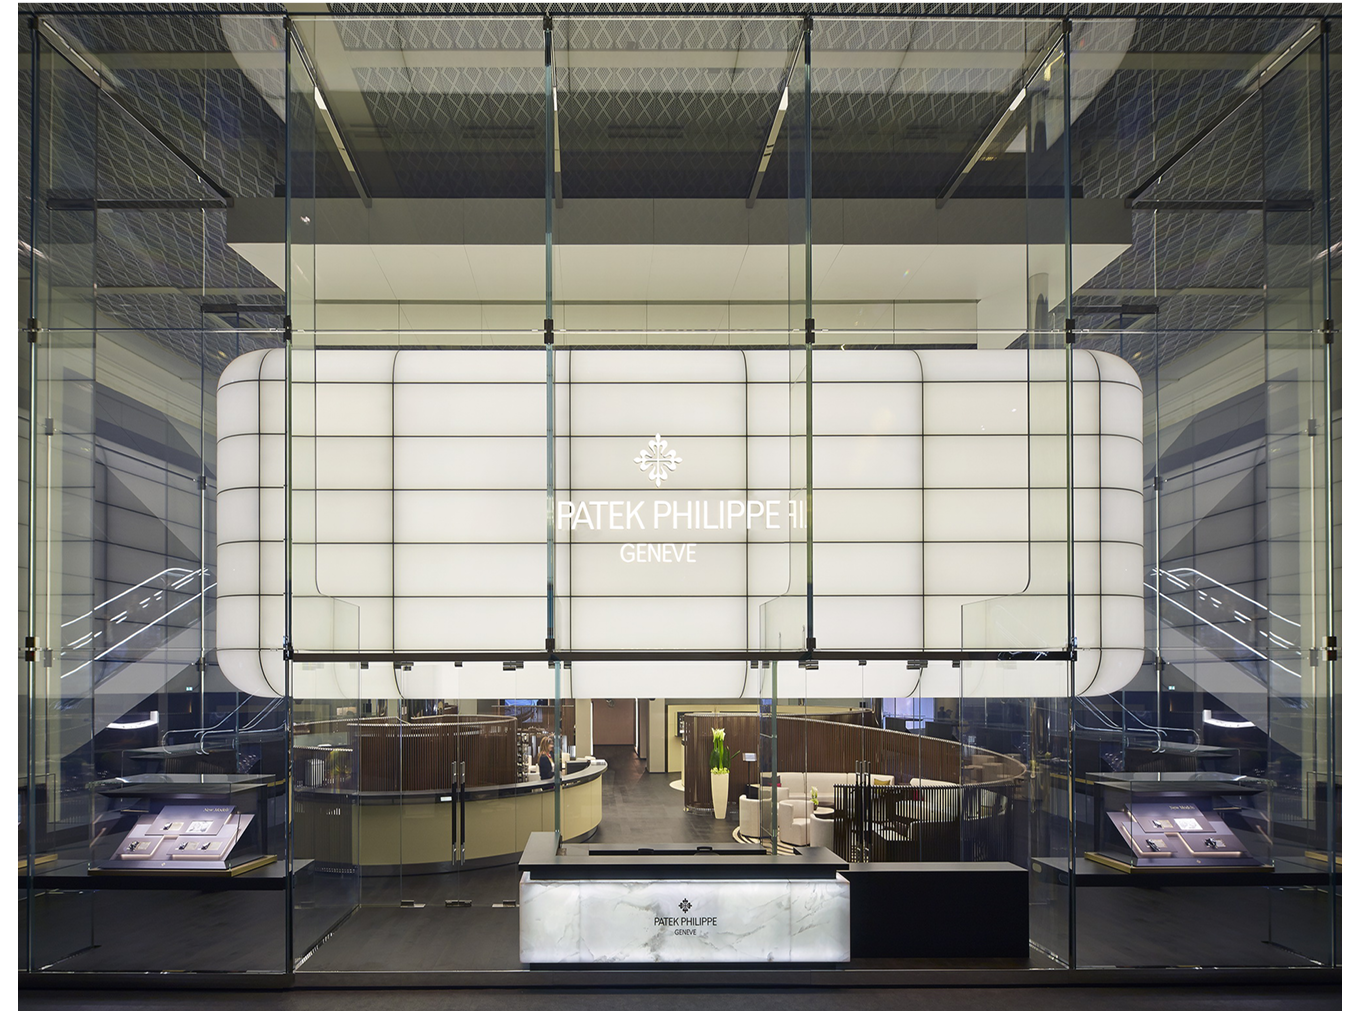 Patek Philippe watch fair pavilion, designed in 2014 and remodelled for Watches and Wonders